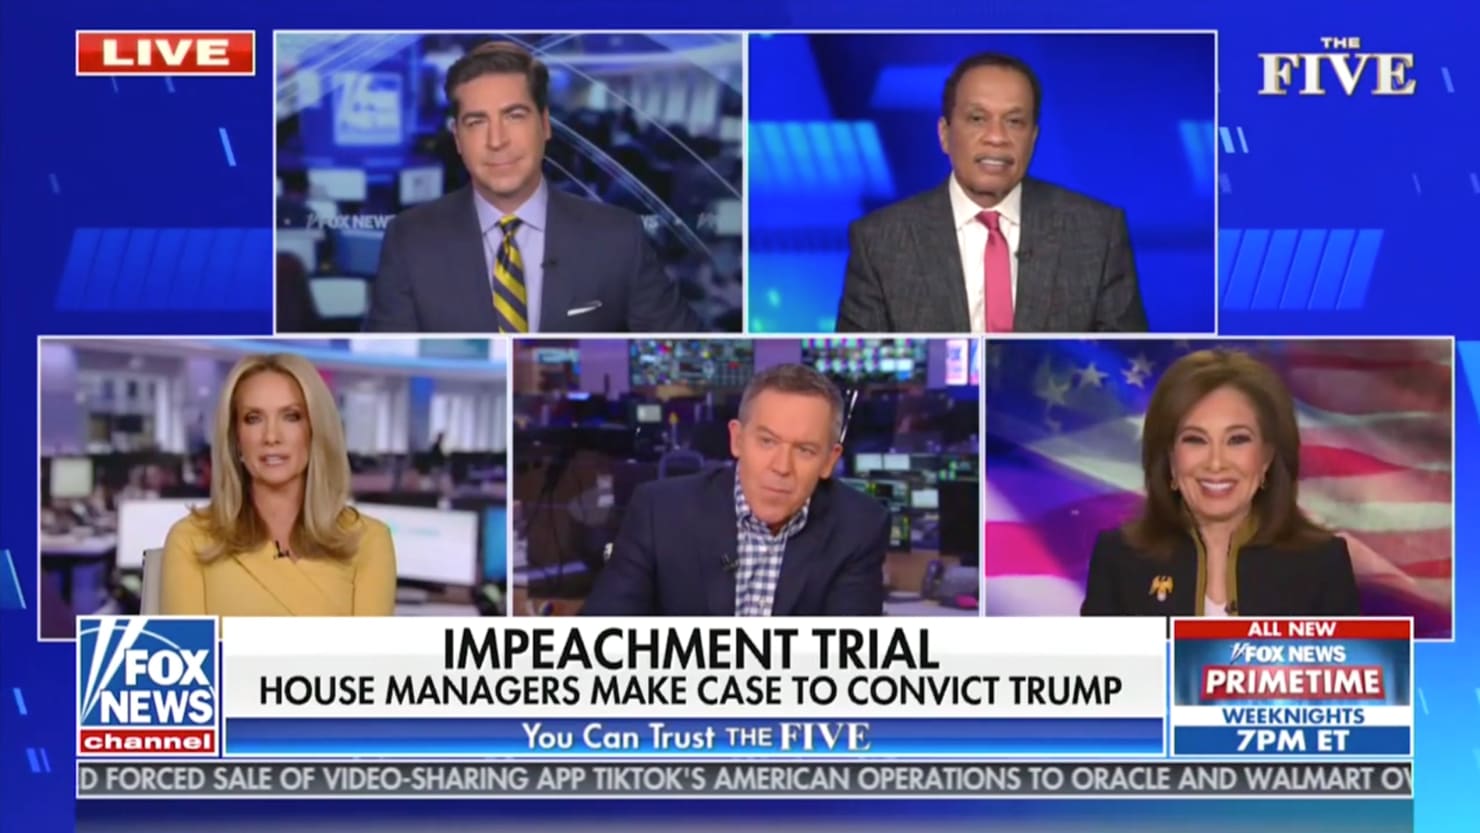 Fox News resists video of harrowing impeachment trial over idiotic ramblings of ‘The Five’